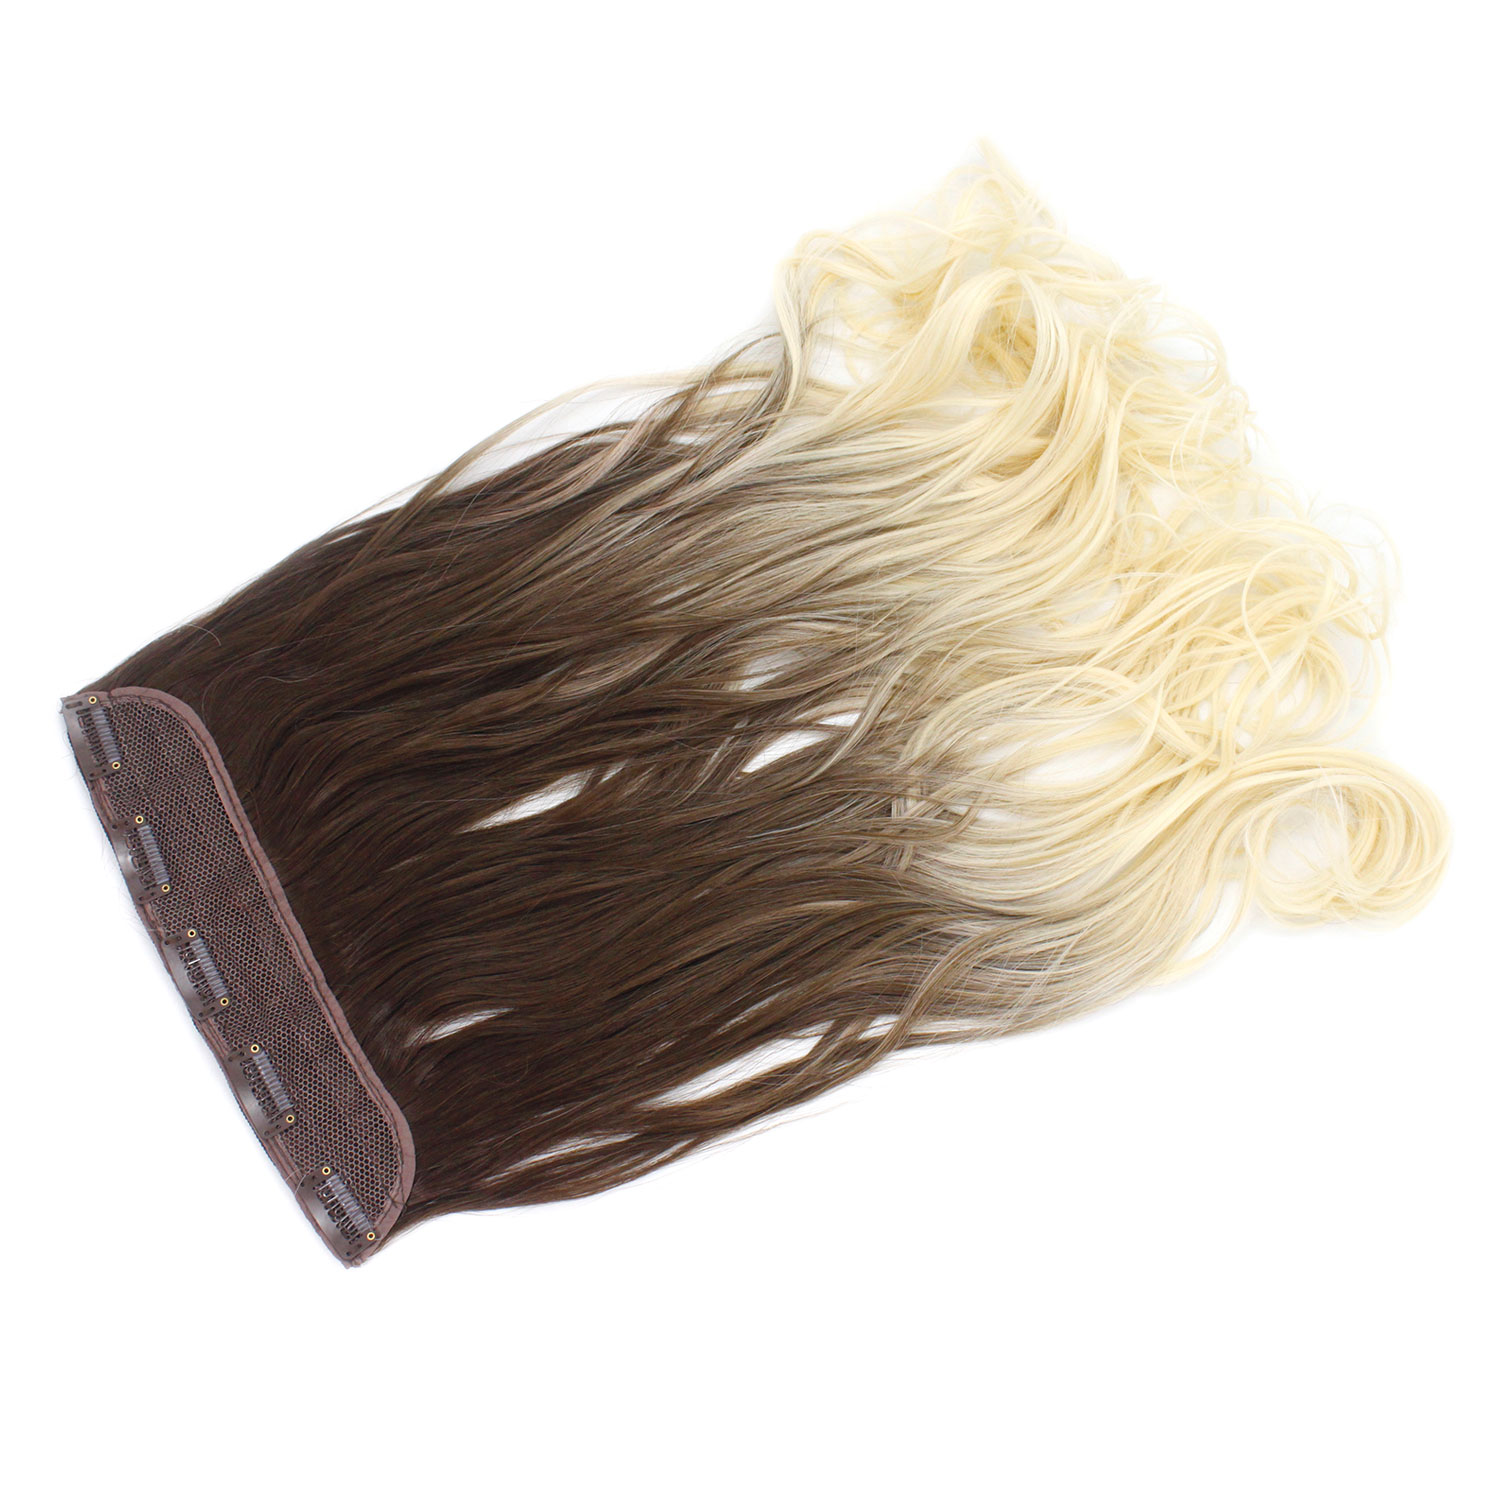 22 Clip In One Piece Wavy Curly Light Brown Bleach Blonde Ombre